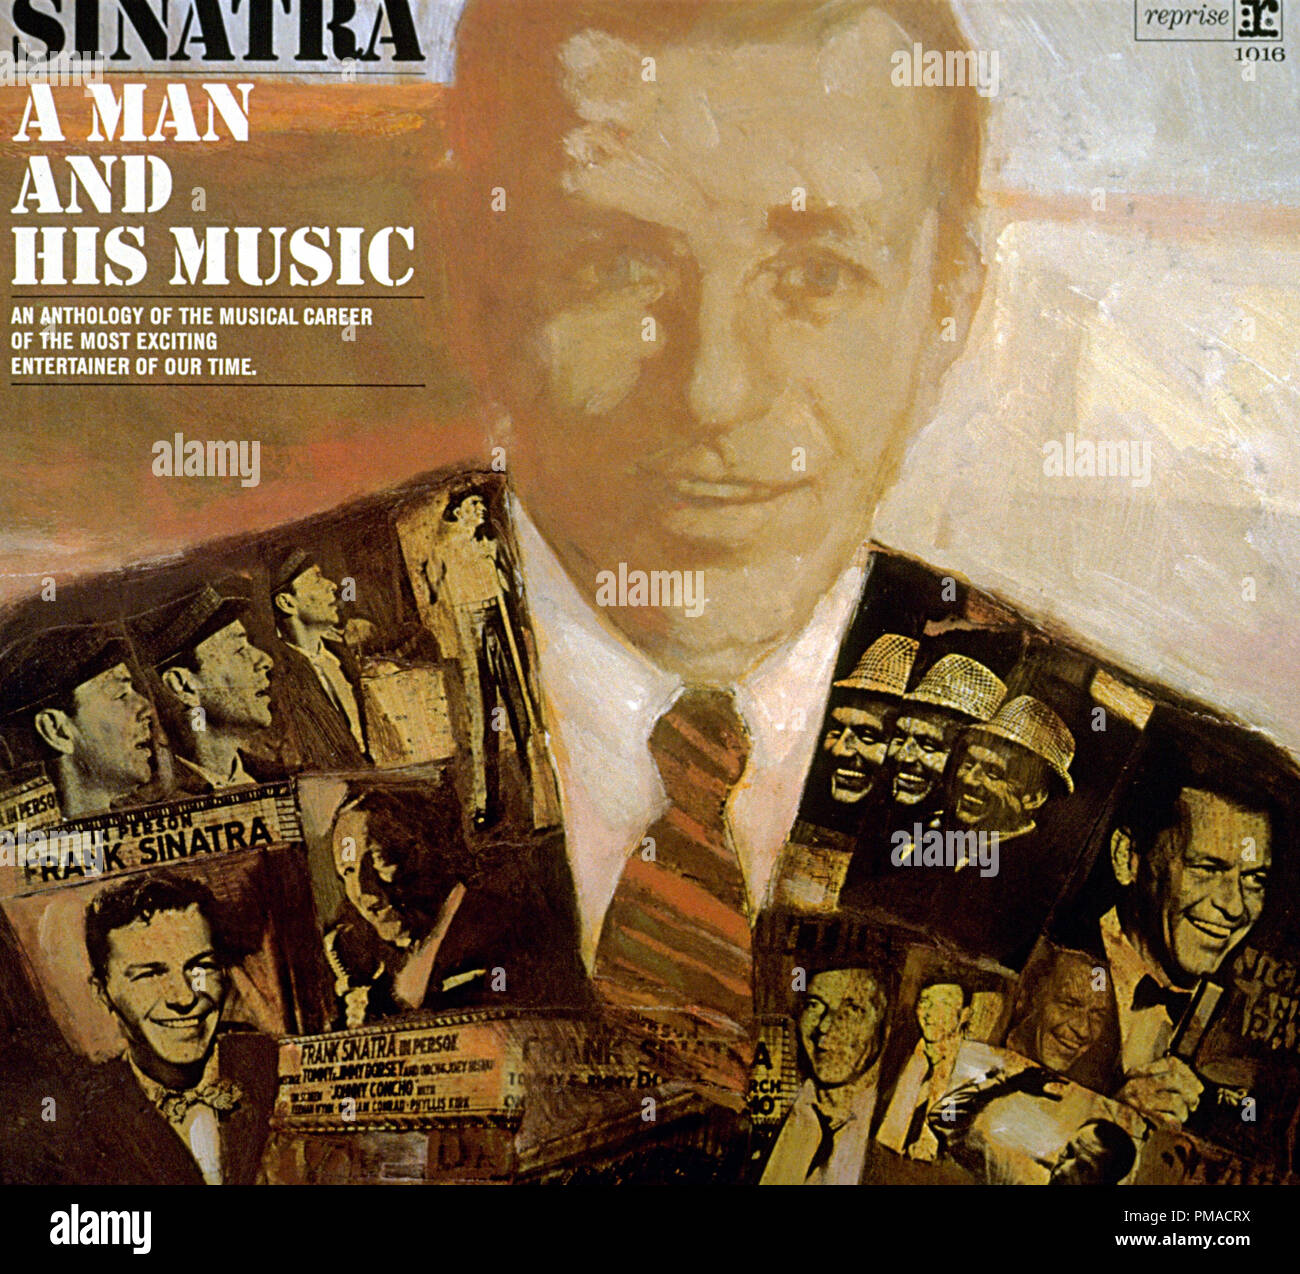 A Man and His Music is a 1965 double album by Frank Sinatra. It provides a brief retrospective of Sinatra's musical career.   File Reference # 32368 430THA Stock Photo